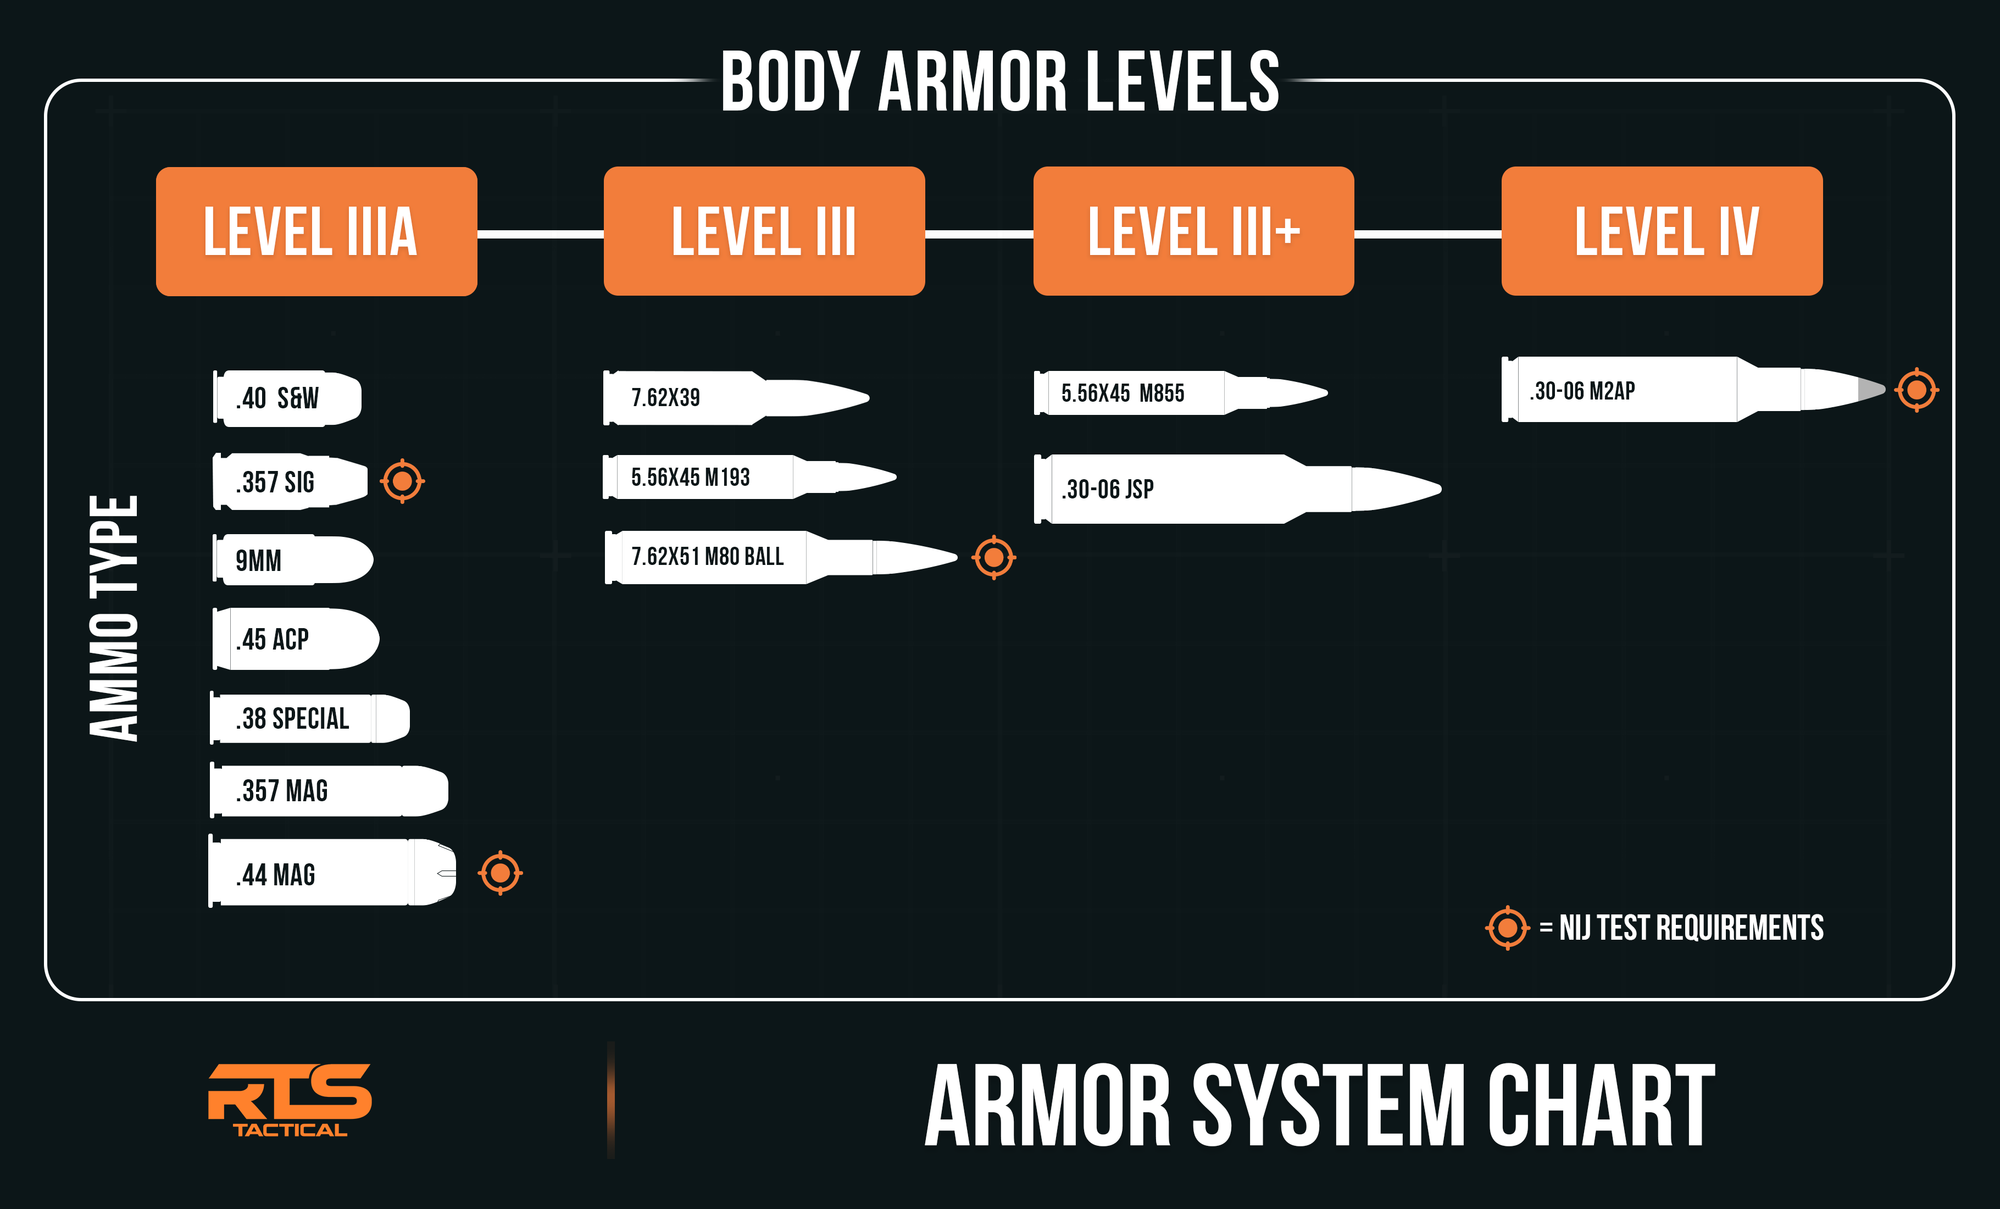 What are Different Levels of Body Armor?